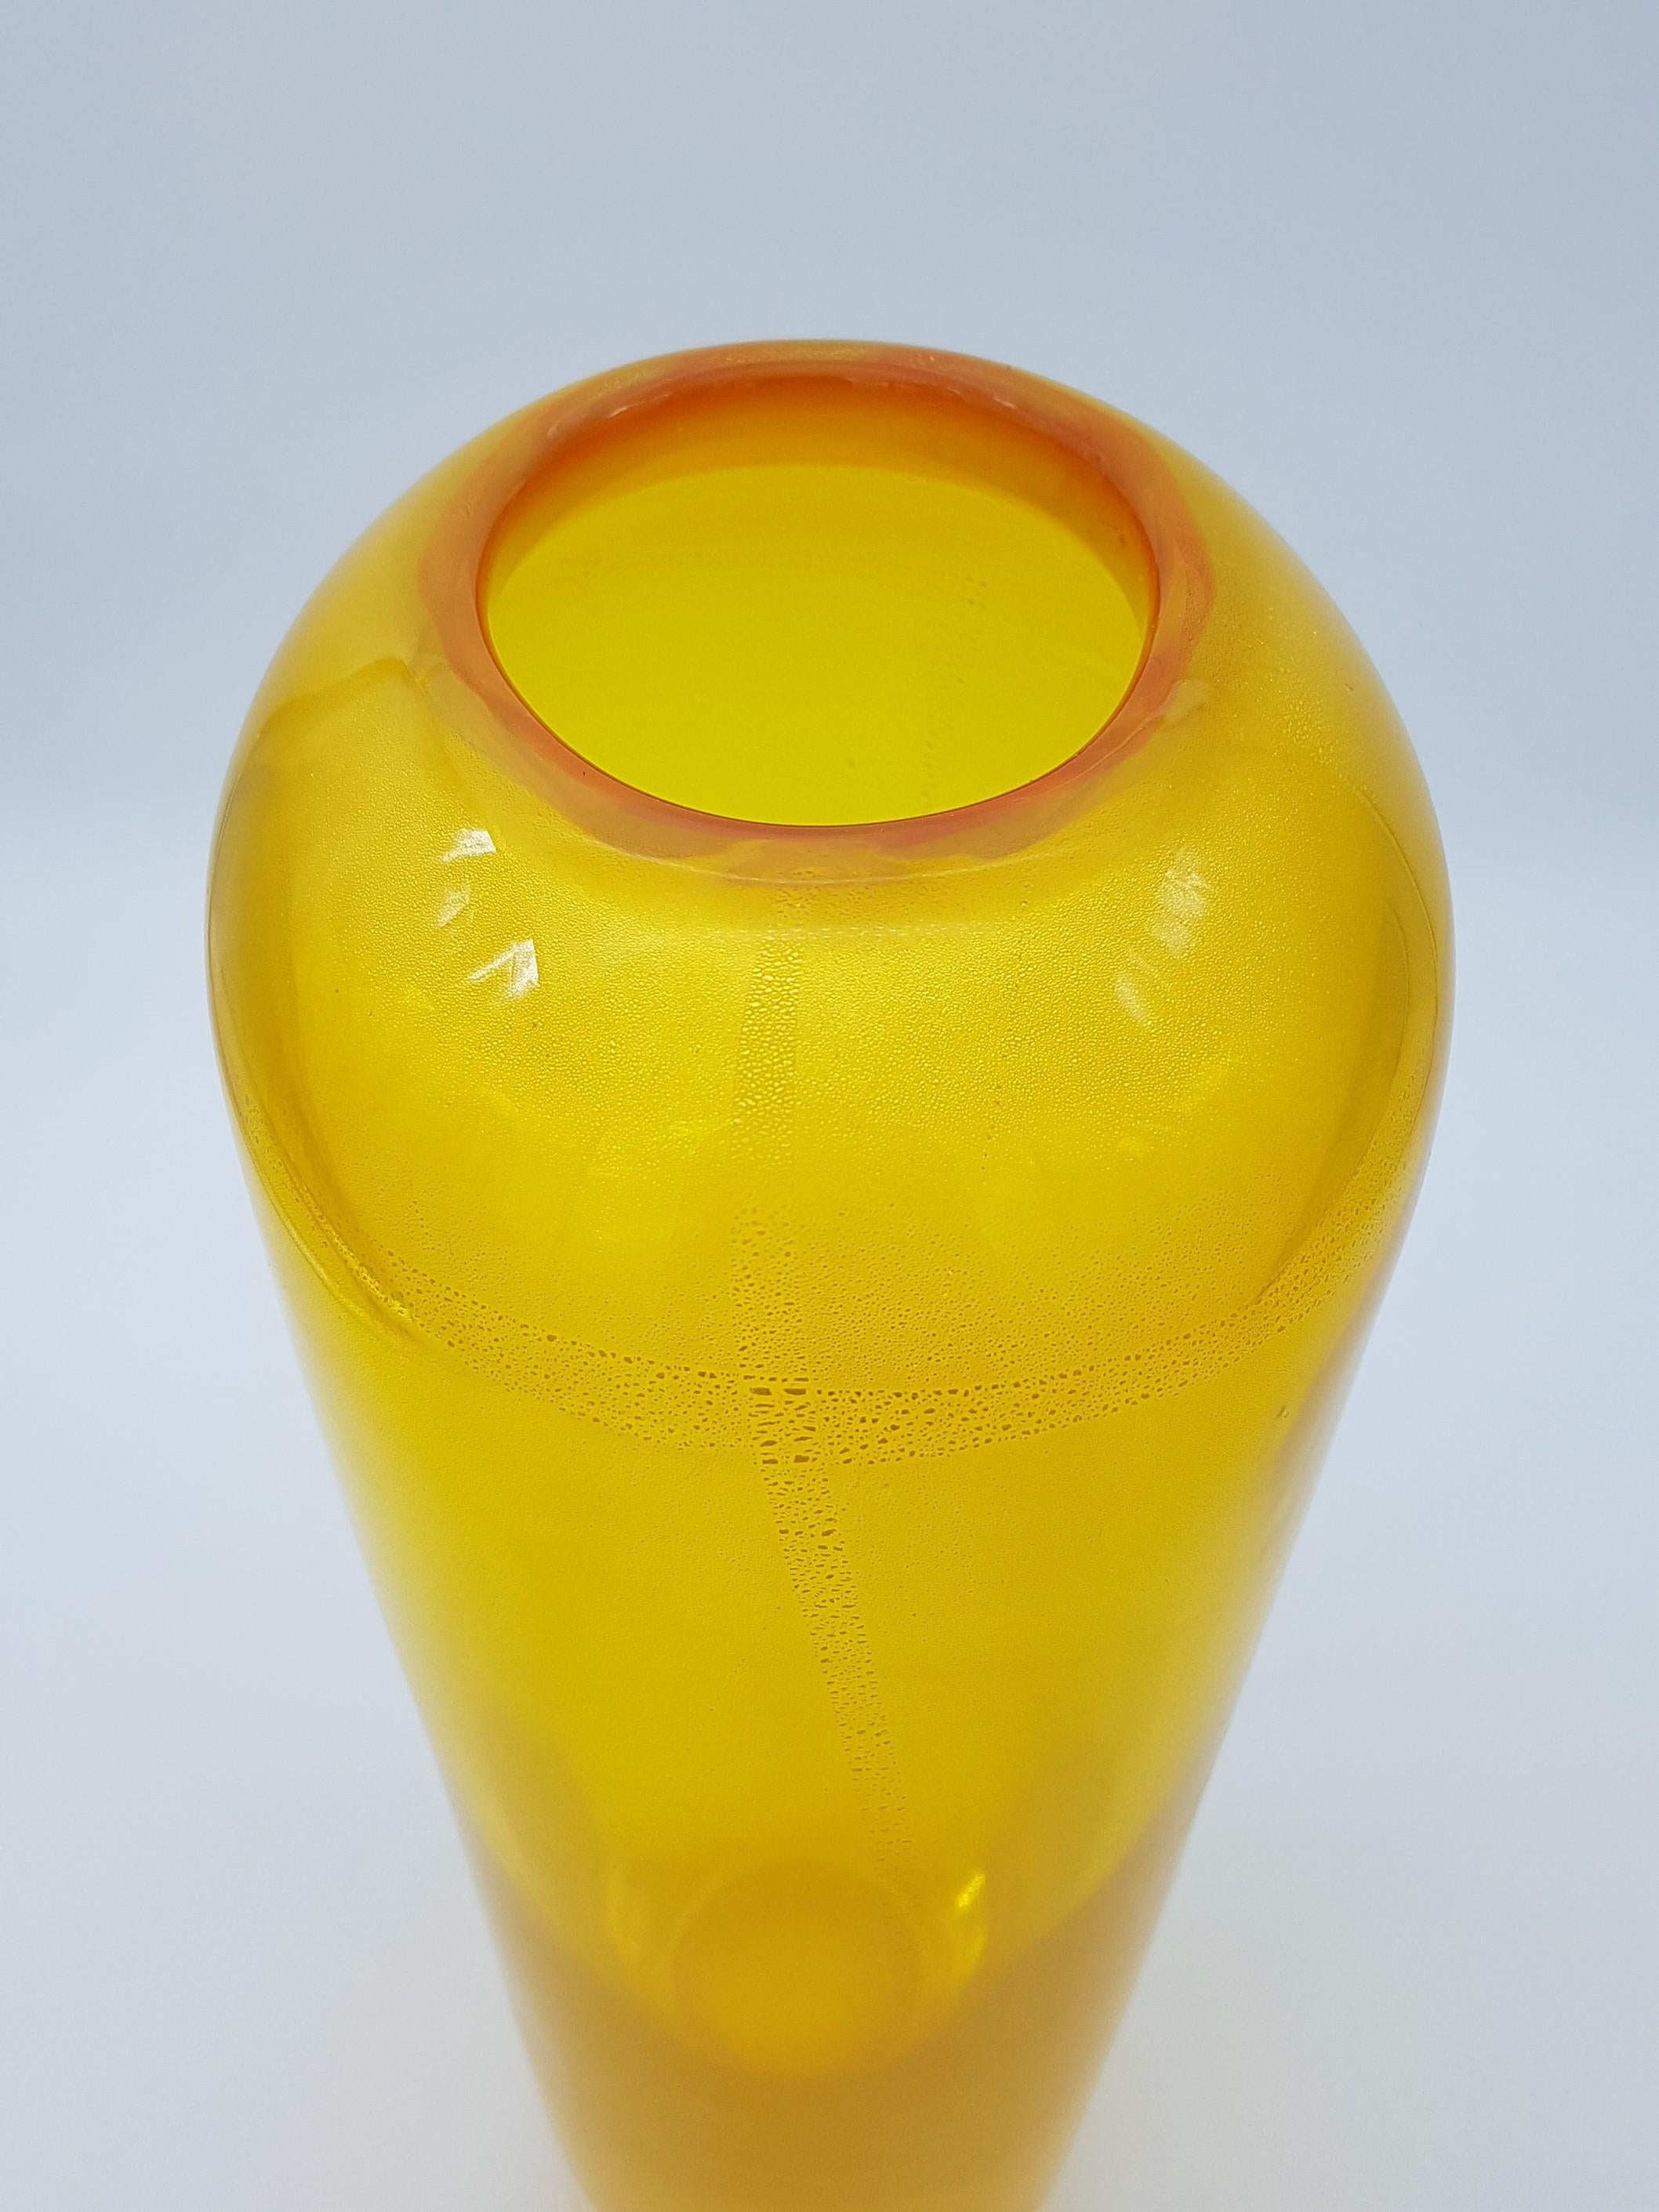 Modern Murano Glass Vase Gold Yellow Color by Cenedese, Late 1990s For Sale 6